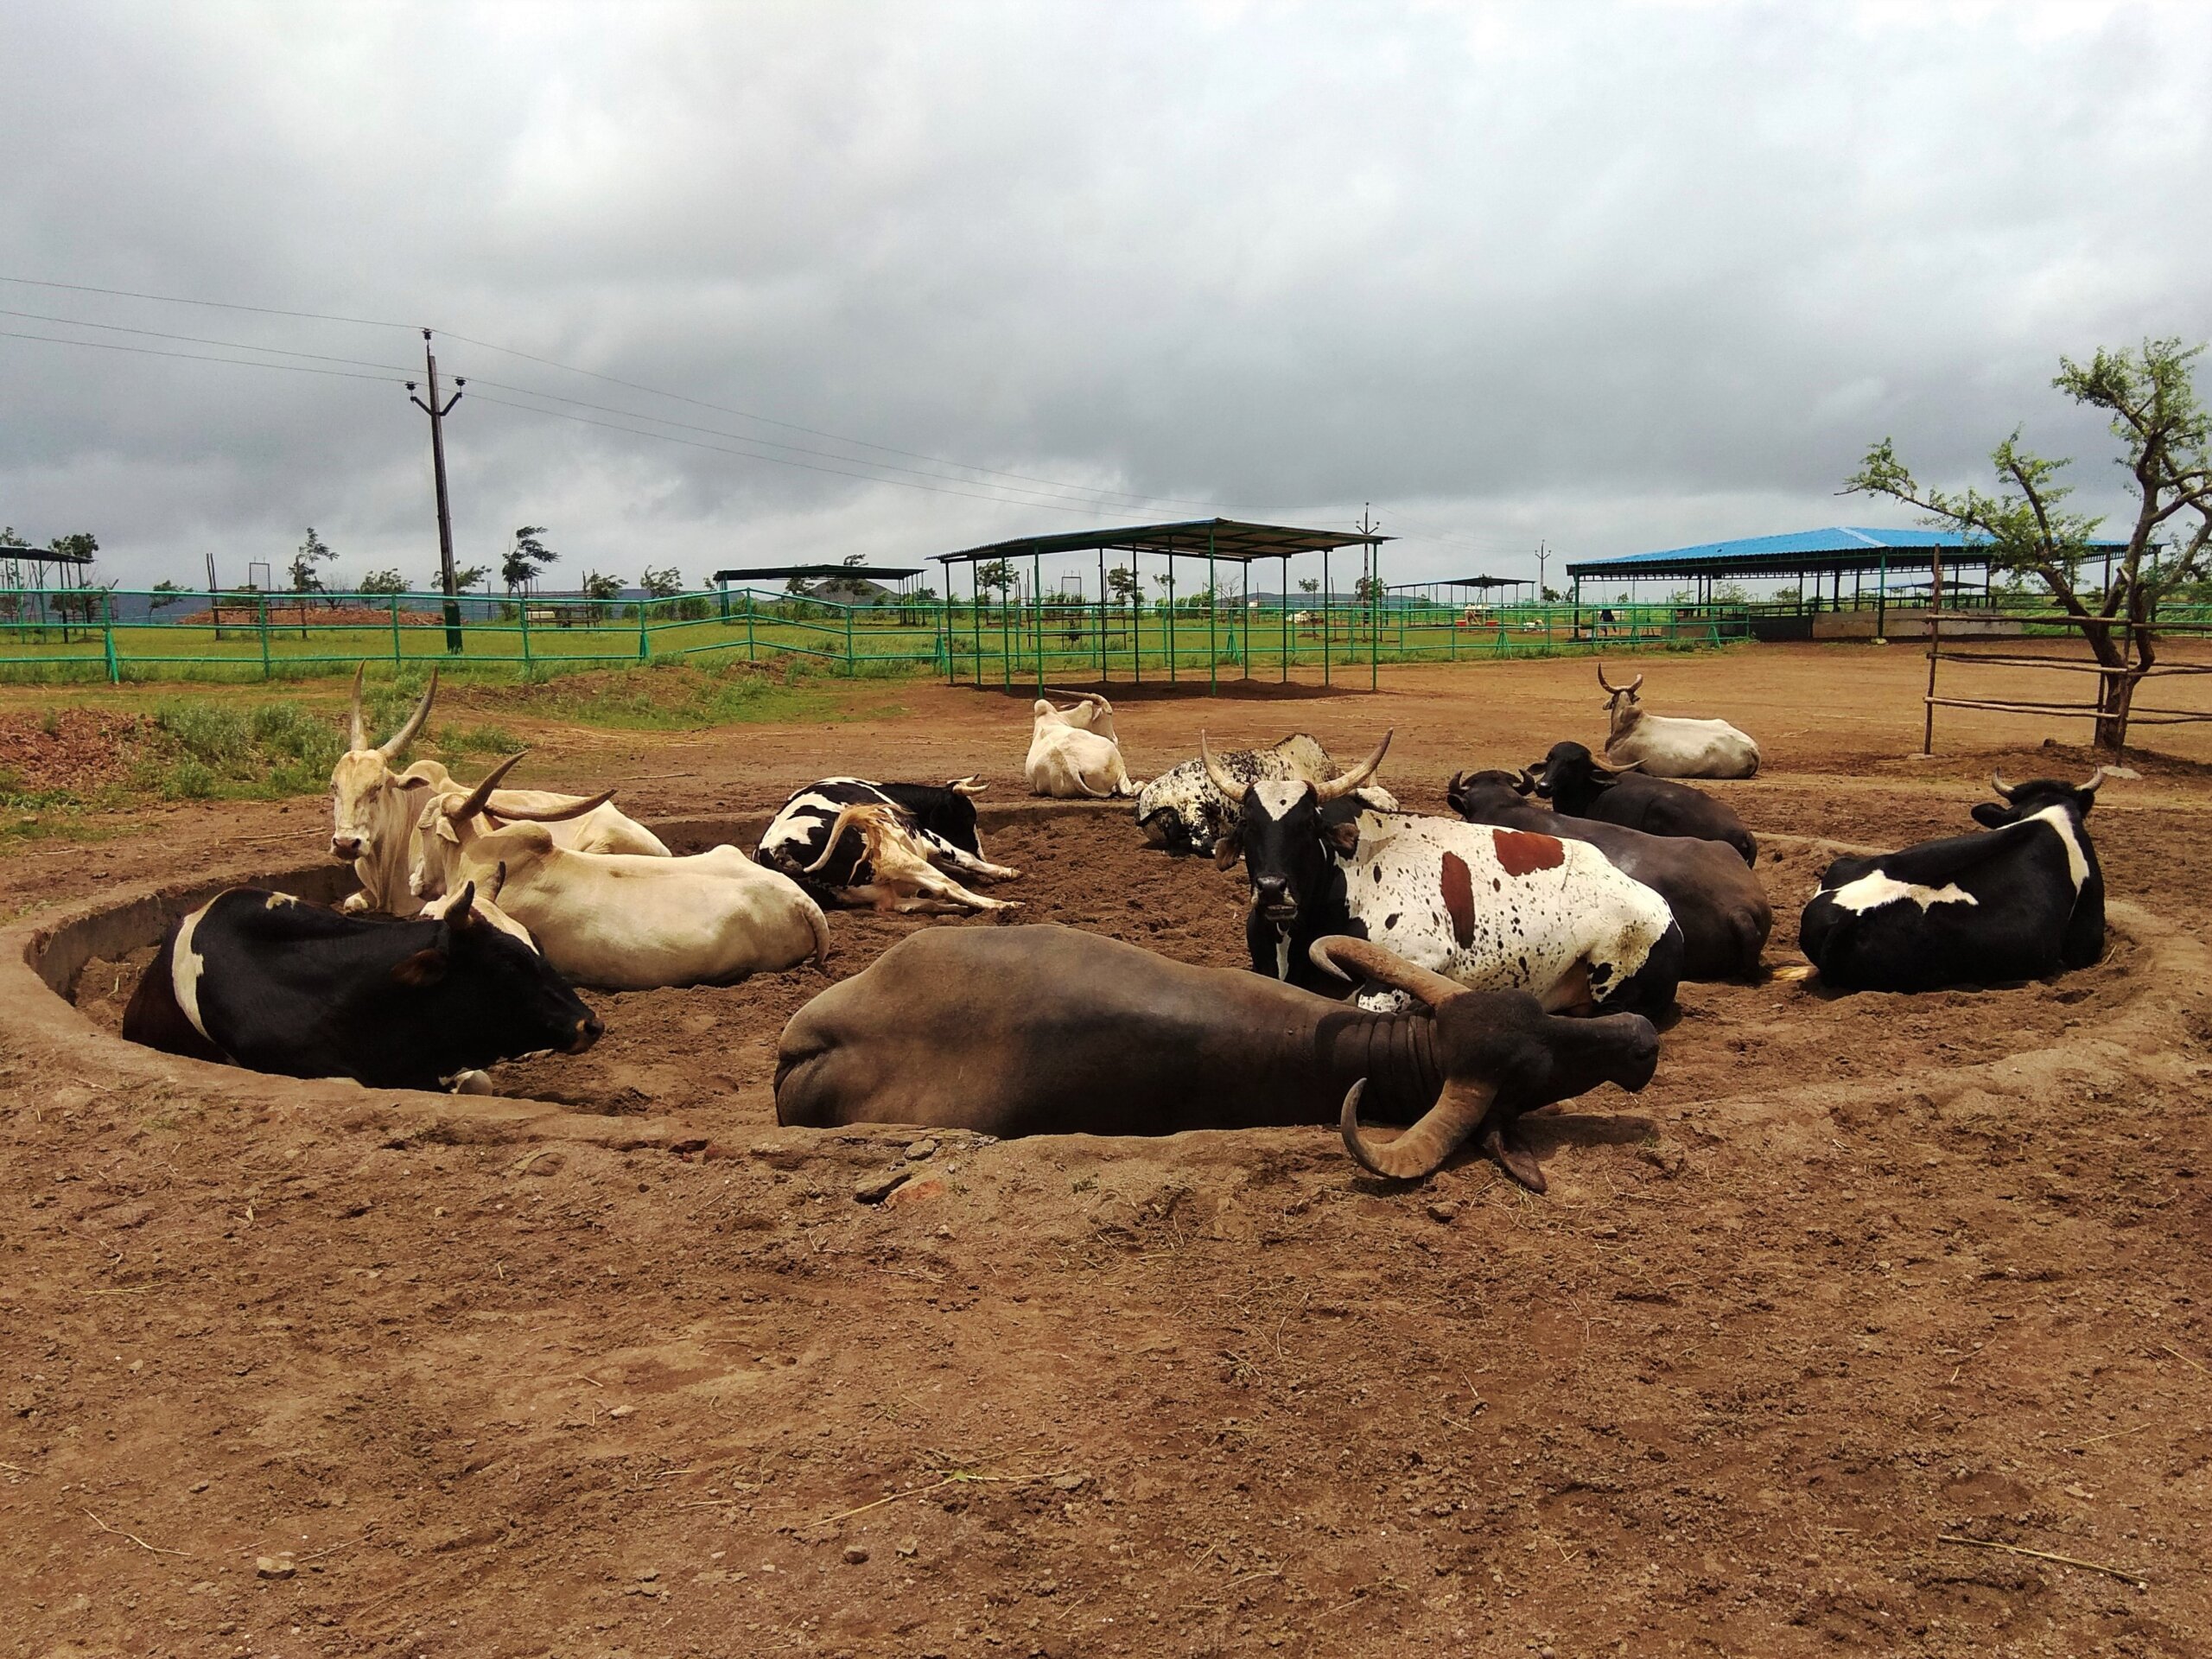 One of the rescued buffaloes joins rescued bullocks at the sand pit for some midday lounging.